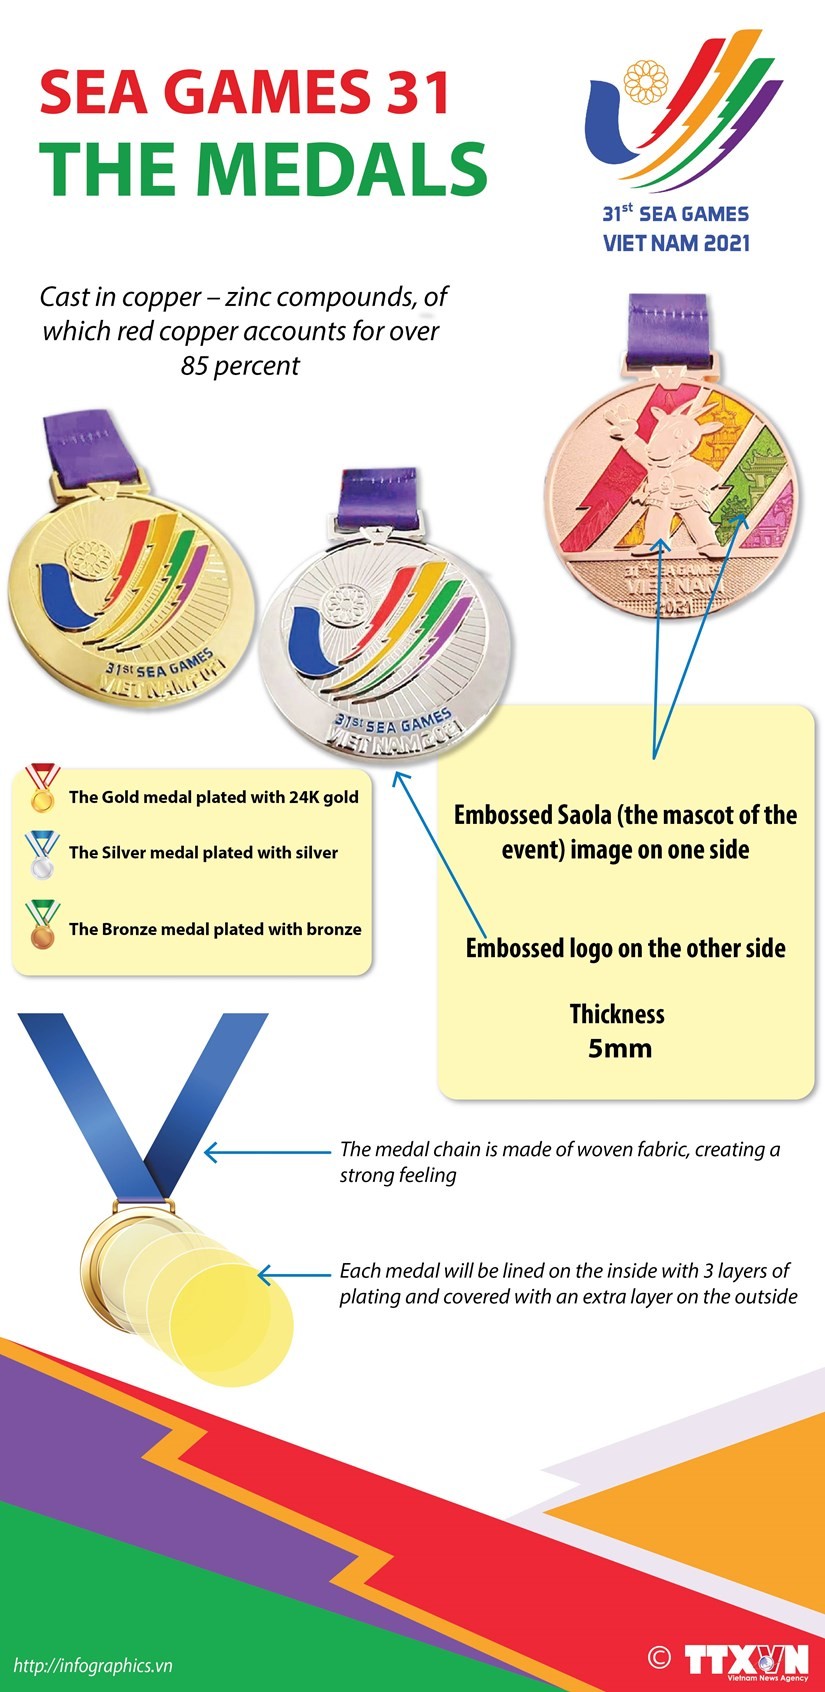 The Organising Committee of SEA Games 31 said the designs of medals to be awarded during the SEA Games 31 have been completed, and the manufacture of the medals has begun.